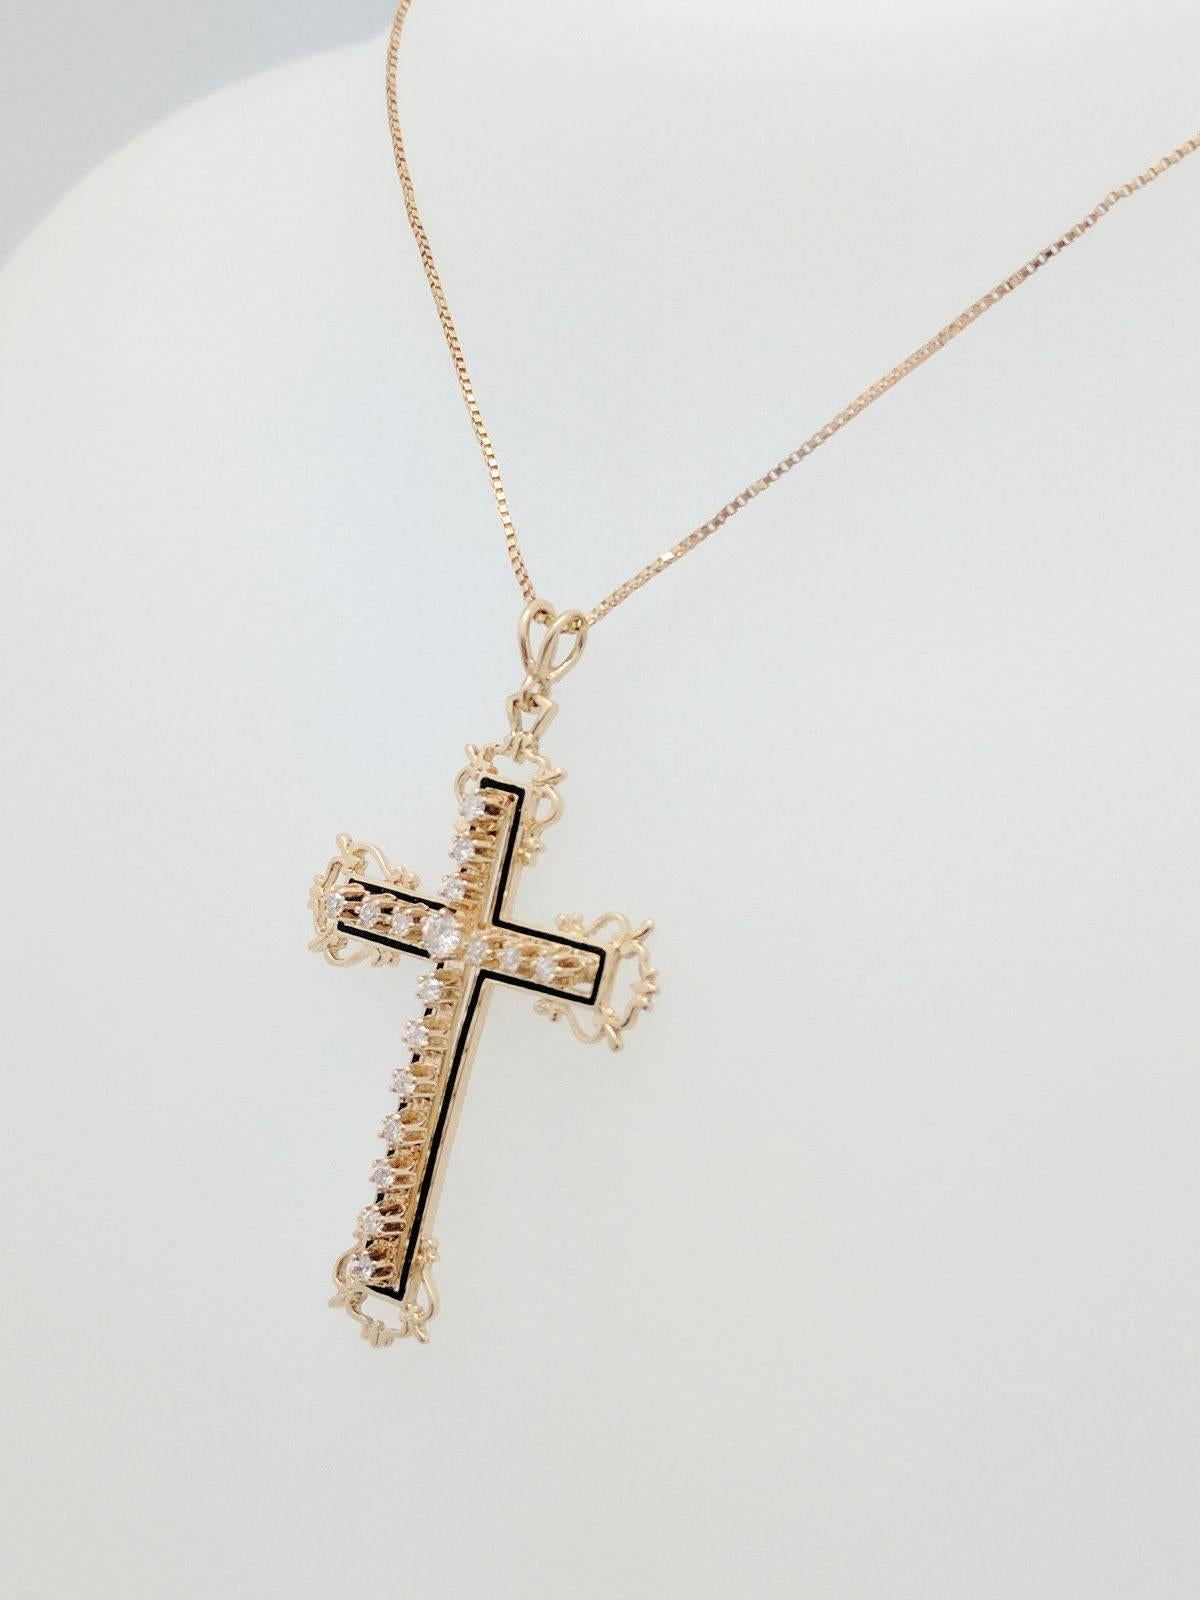 14 Karat Yellow Gold Diamond Cross Pendant Necklace In Excellent Condition For Sale In Gainesville, FL